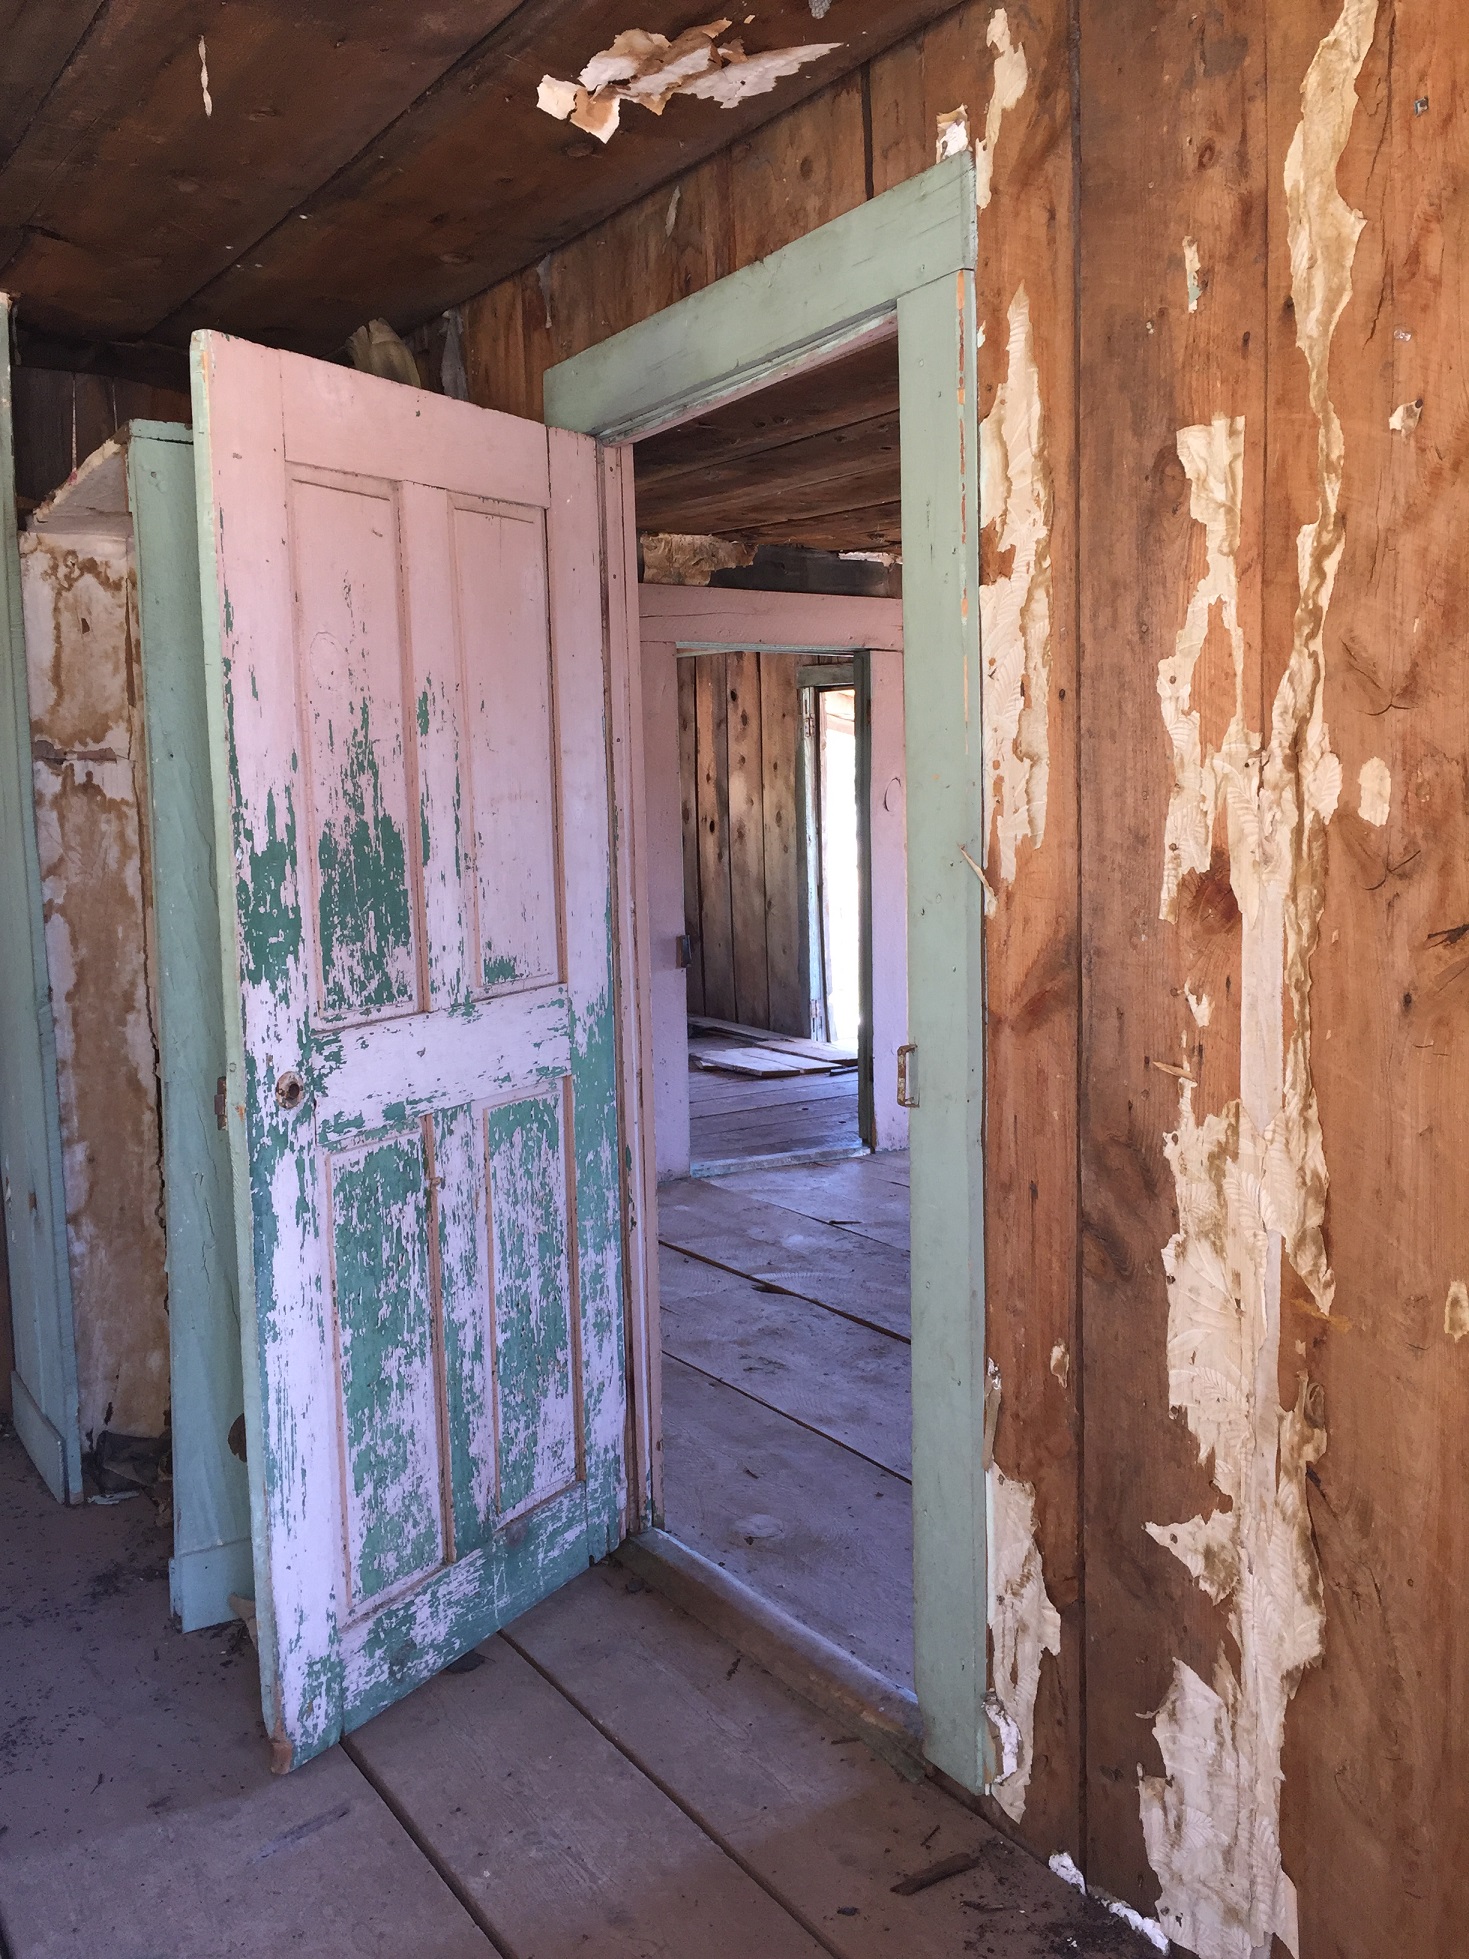 Inside doors and a closet in the Pine Cabin on the Arizona Strip